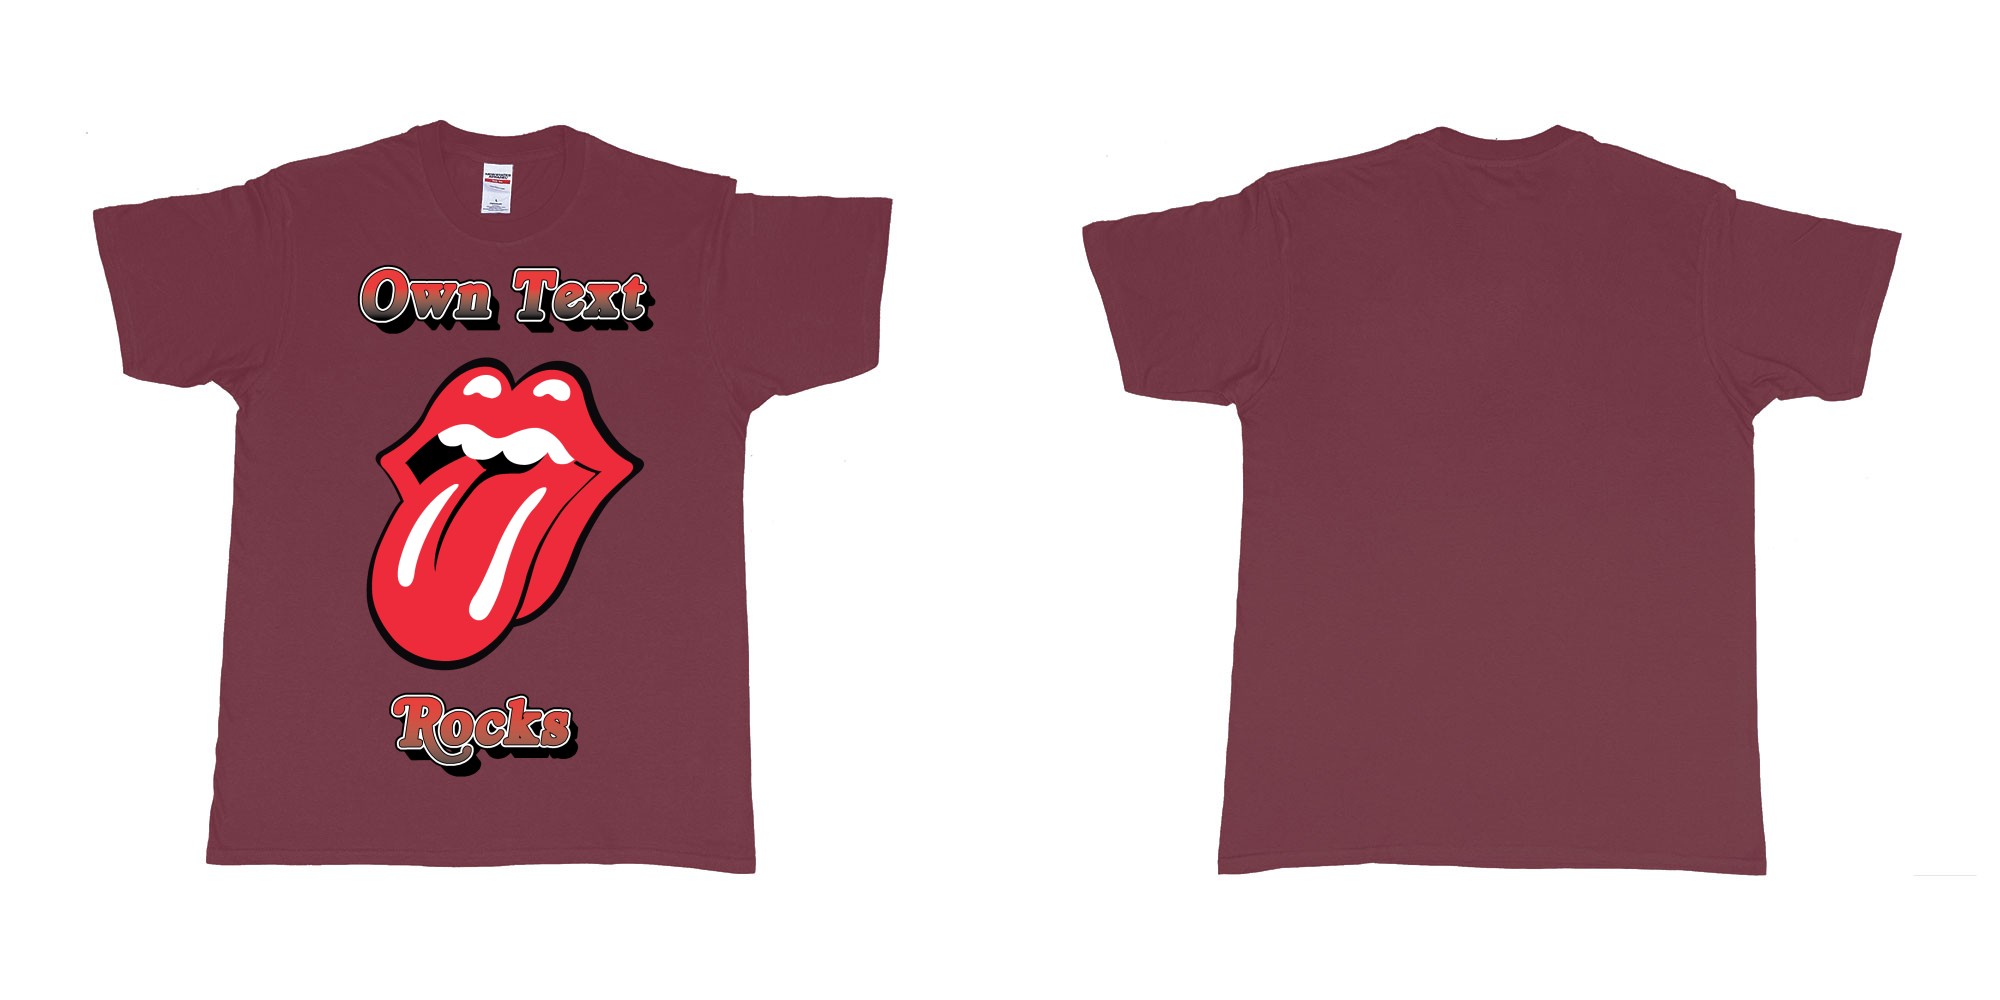 Custom tshirt design own custom text rocks rolling stones logo red tongue and lips print bali in fabric color marron choice your own text made in Bali by The Pirate Way